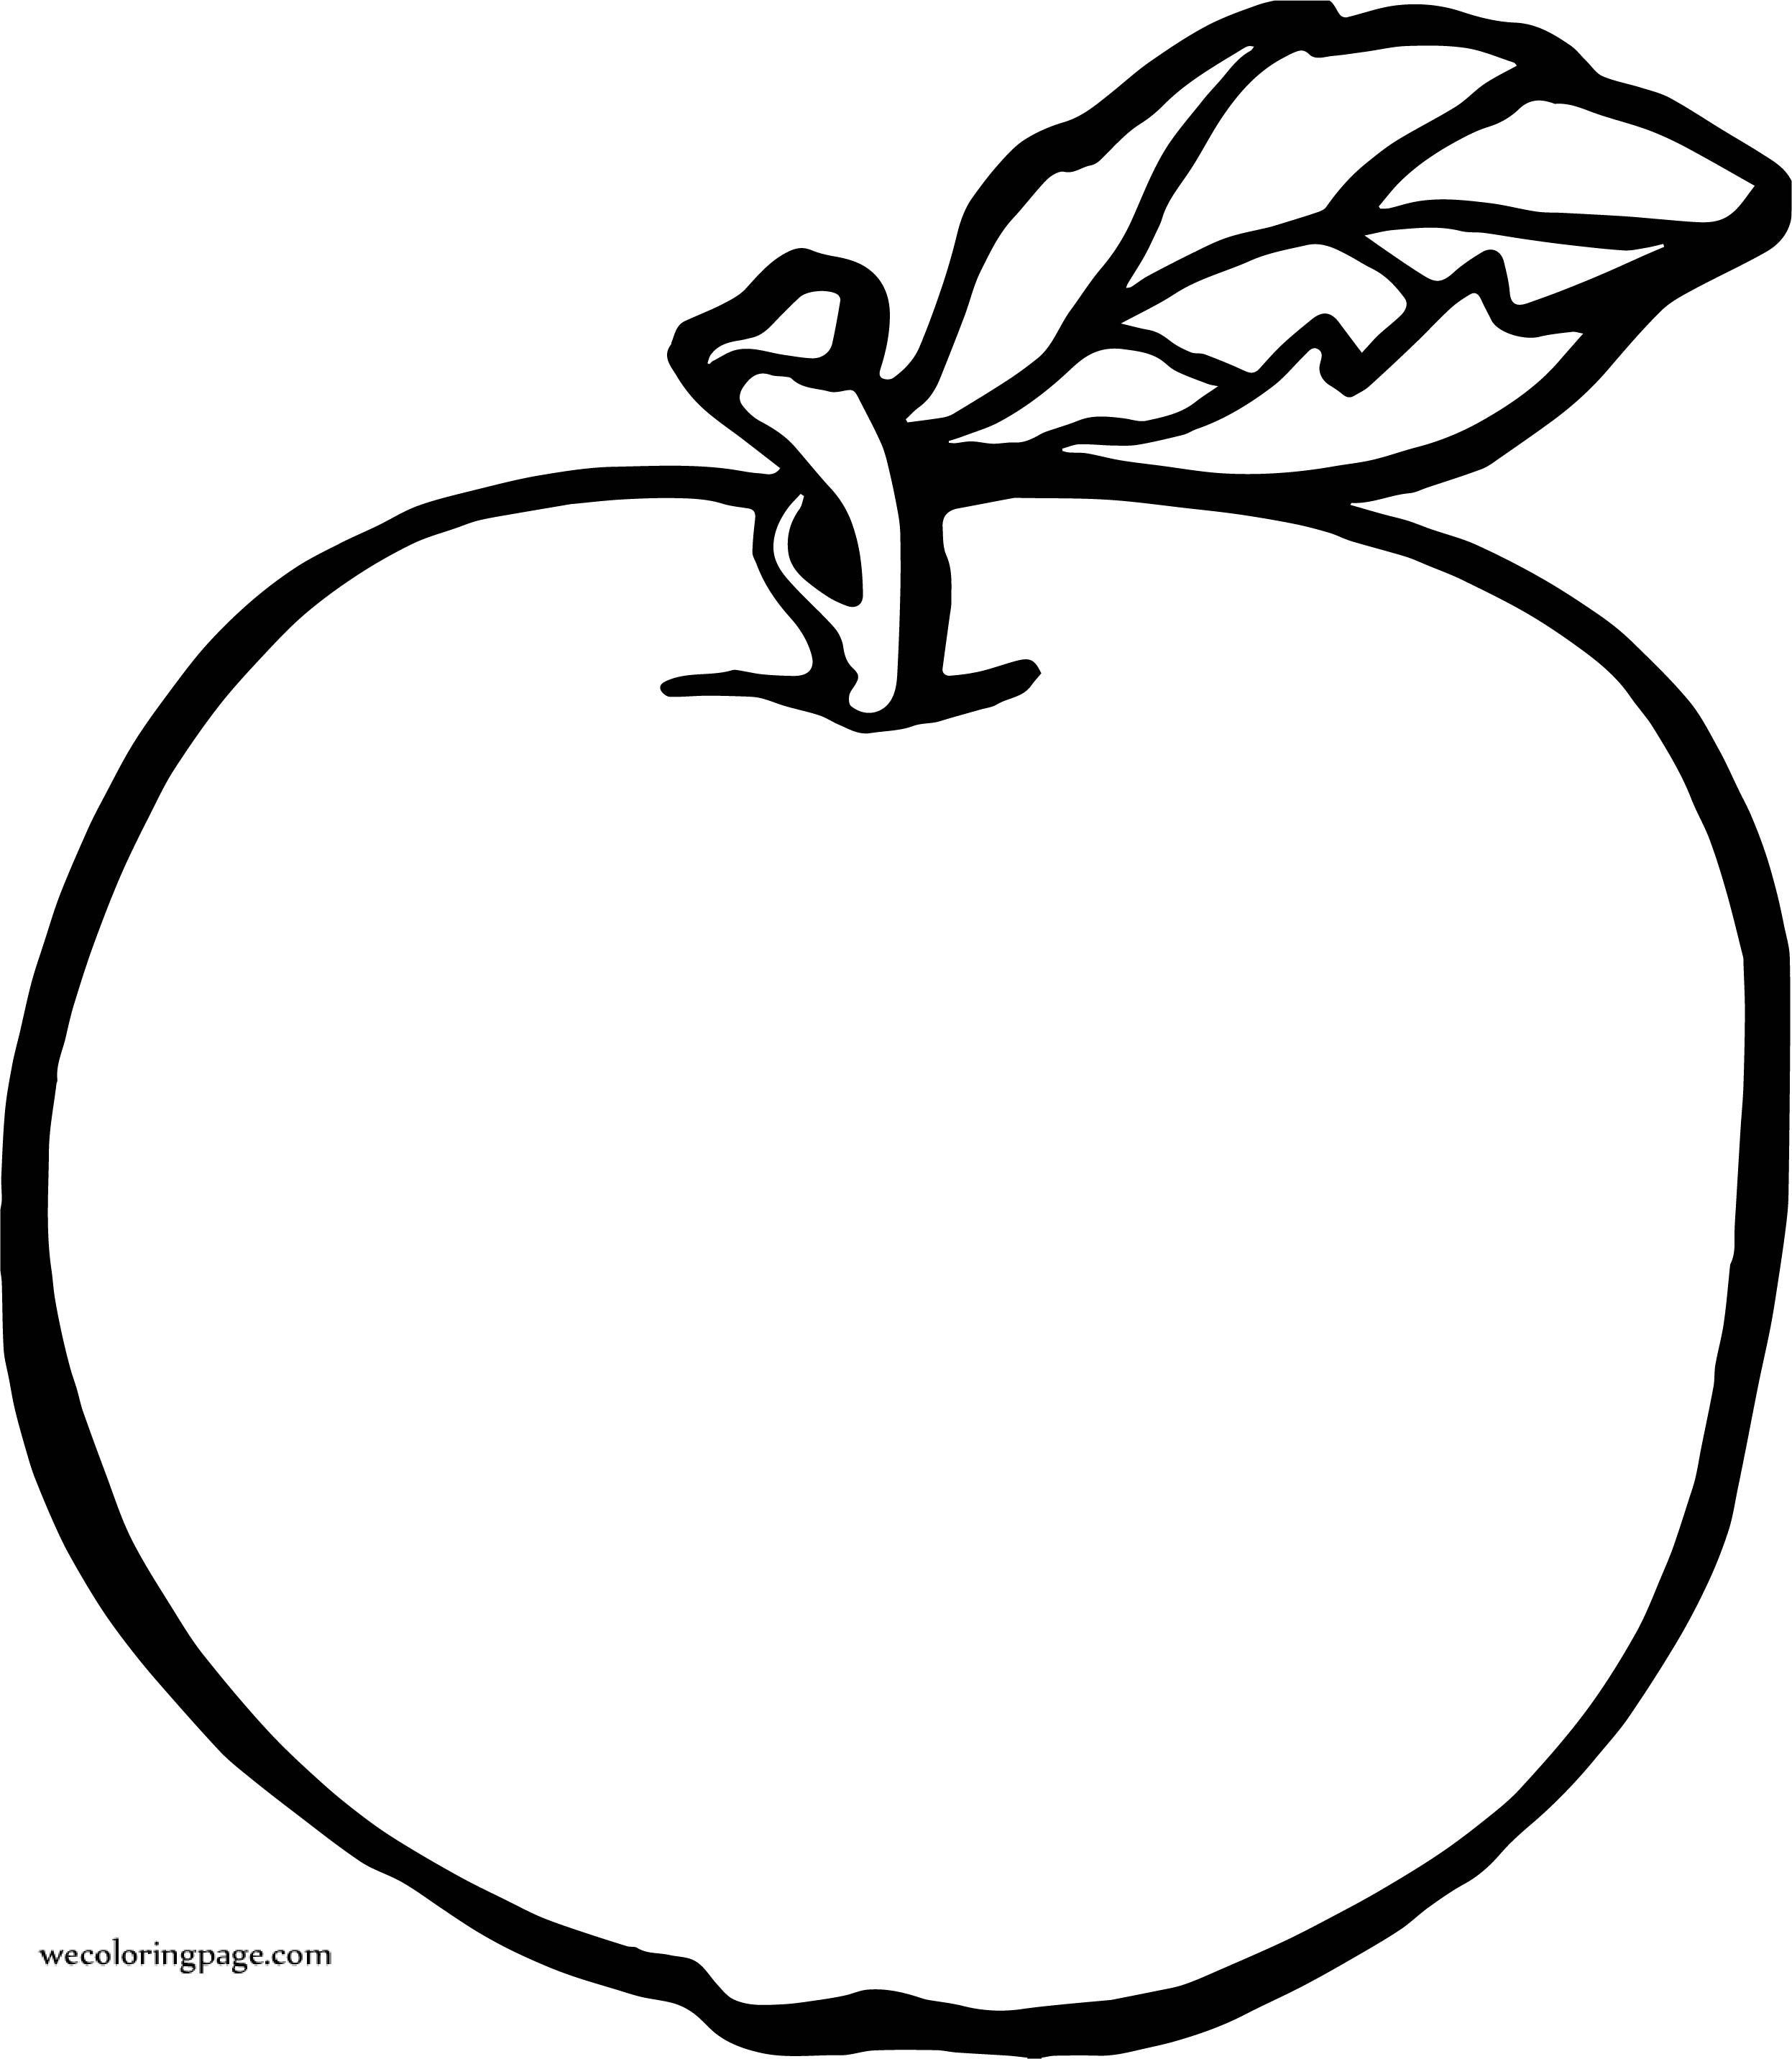 Big Apple Coloring Pages - Coloring Pages